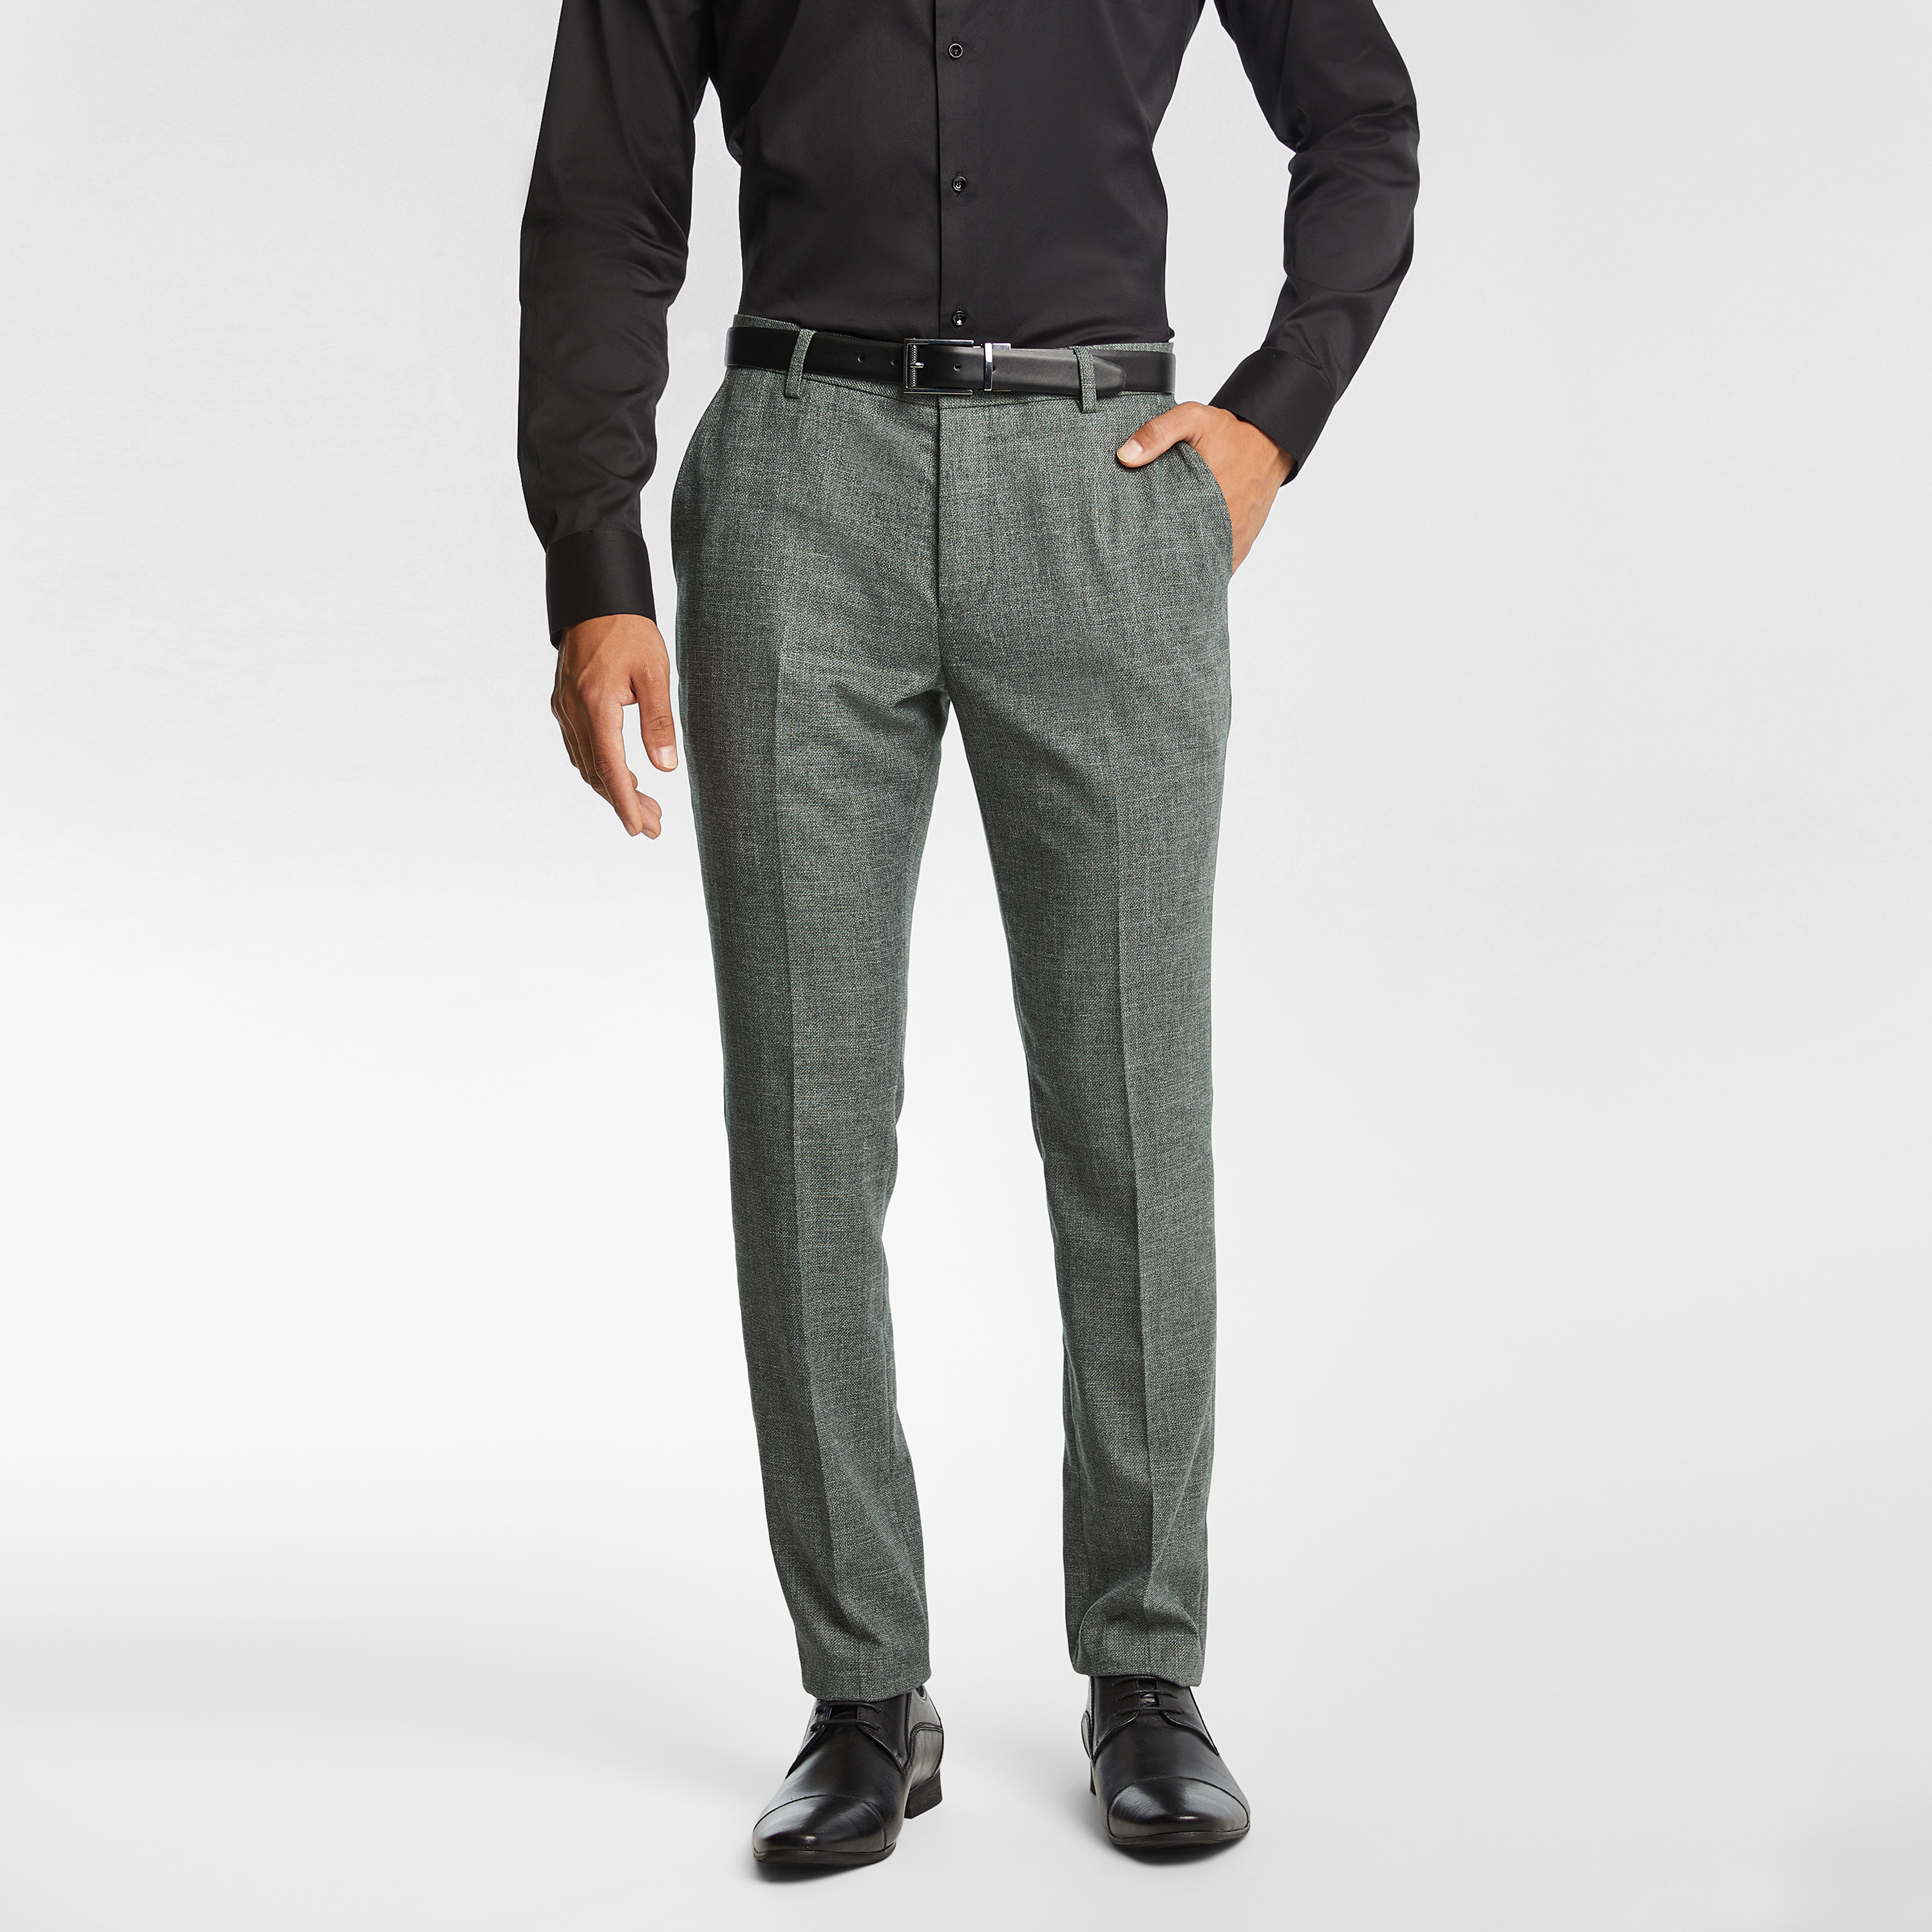 Formal Pants for Men | Stylish Slim Fit Men's Wear Trousers for Office or  Party |